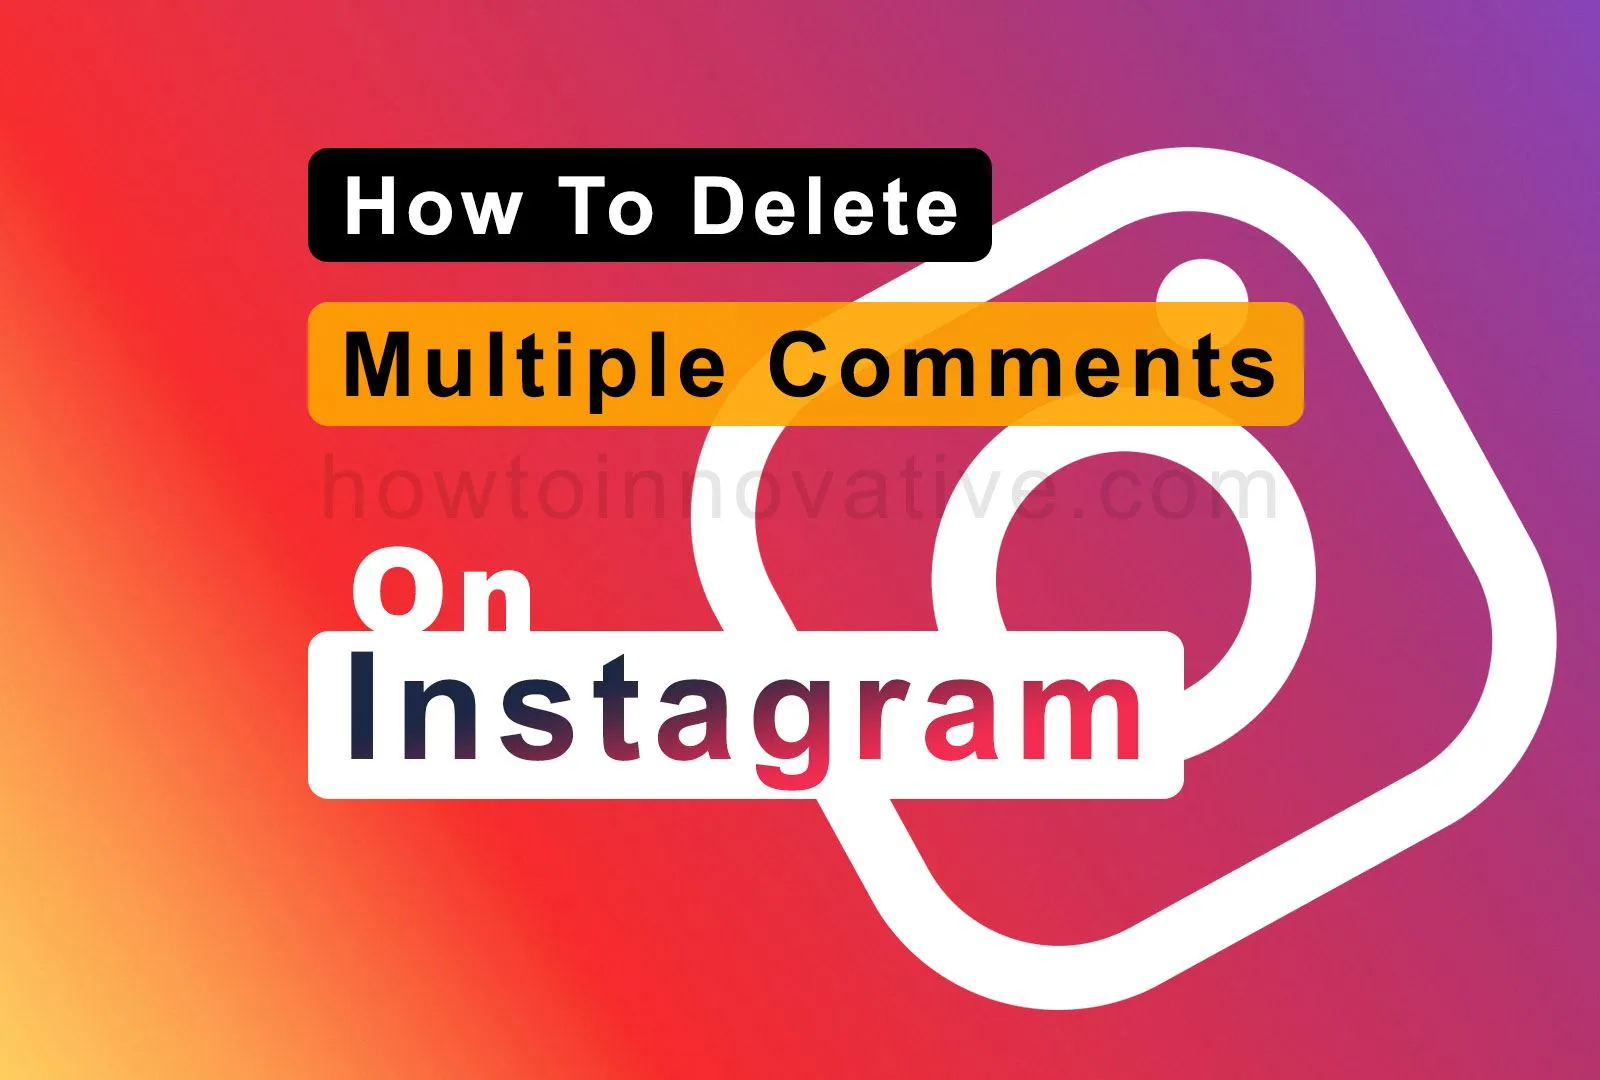 How To Delete Multiple Comments On Instagram